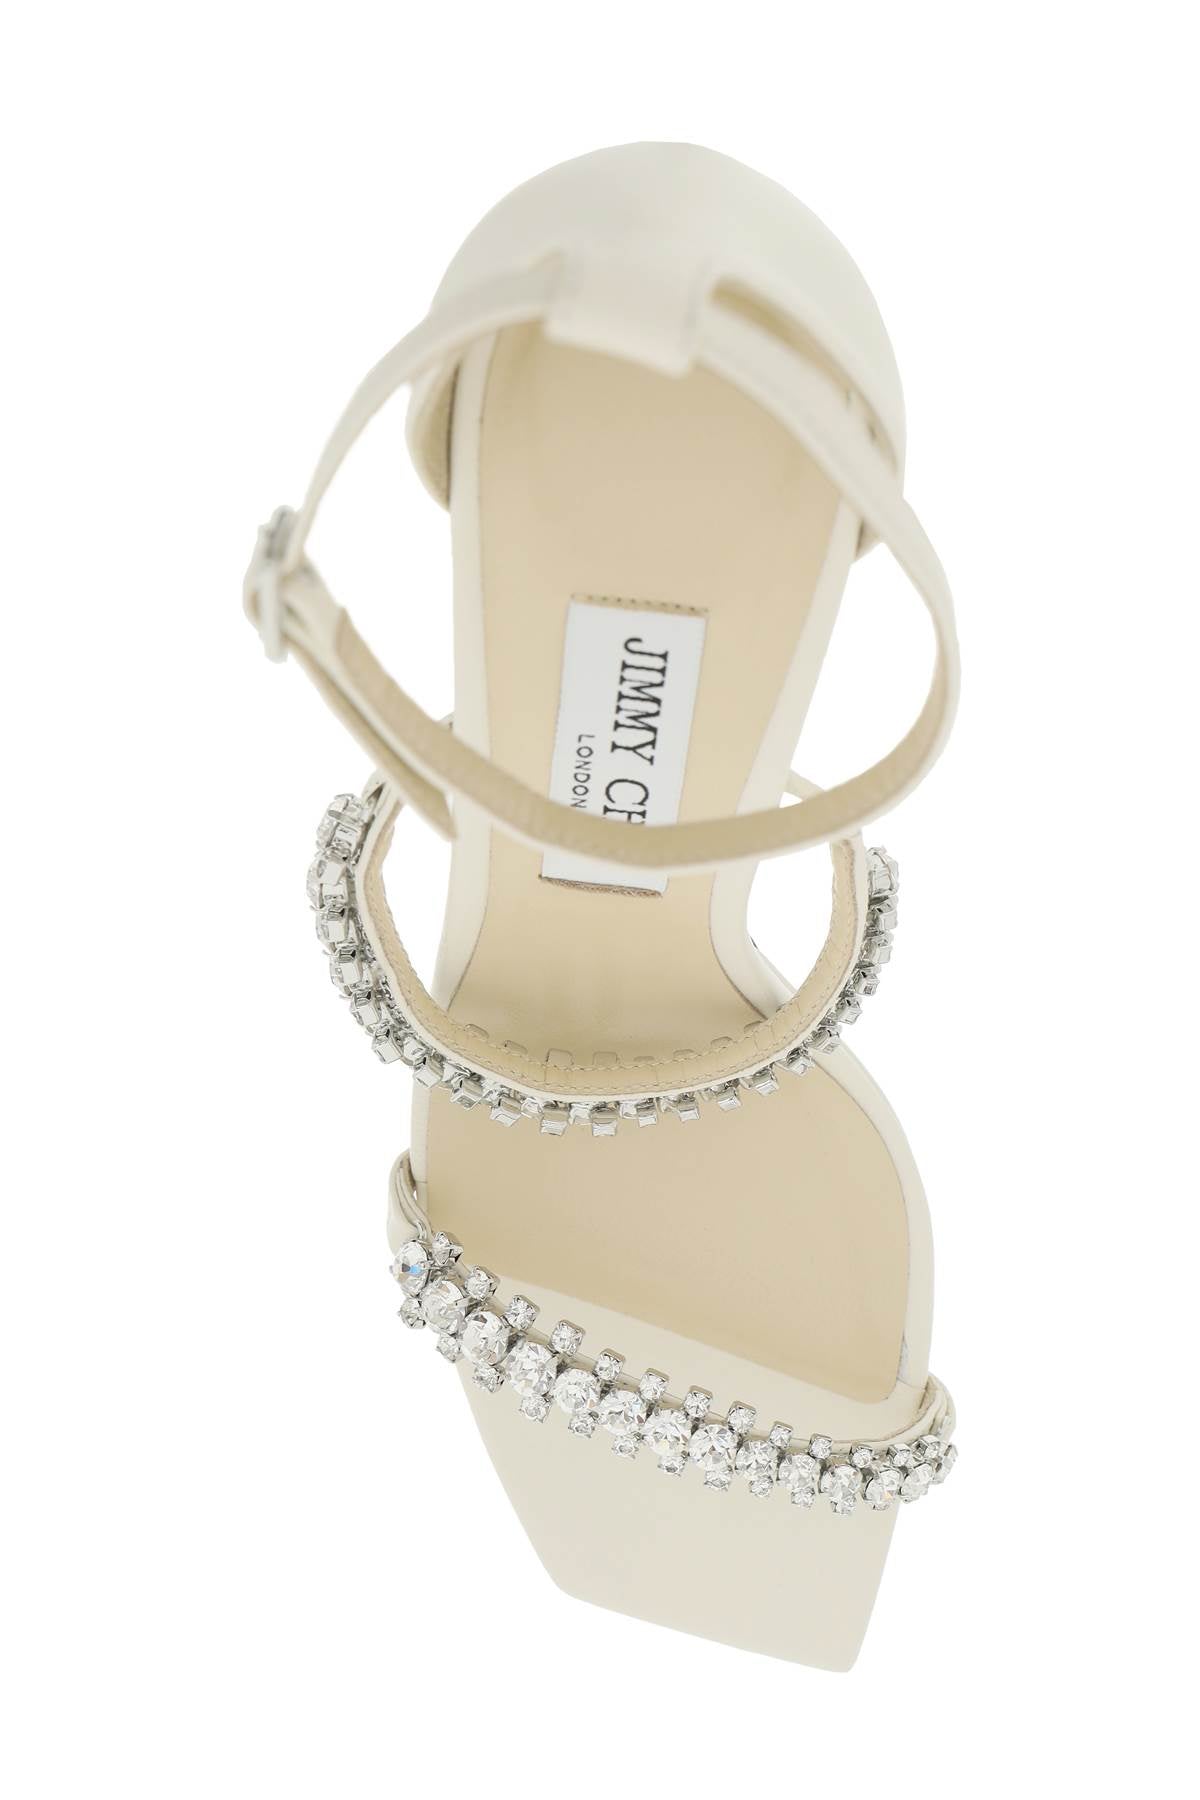 JIMMY CHOO Crystal-Studded Ankle Strap Sandals - Women's White